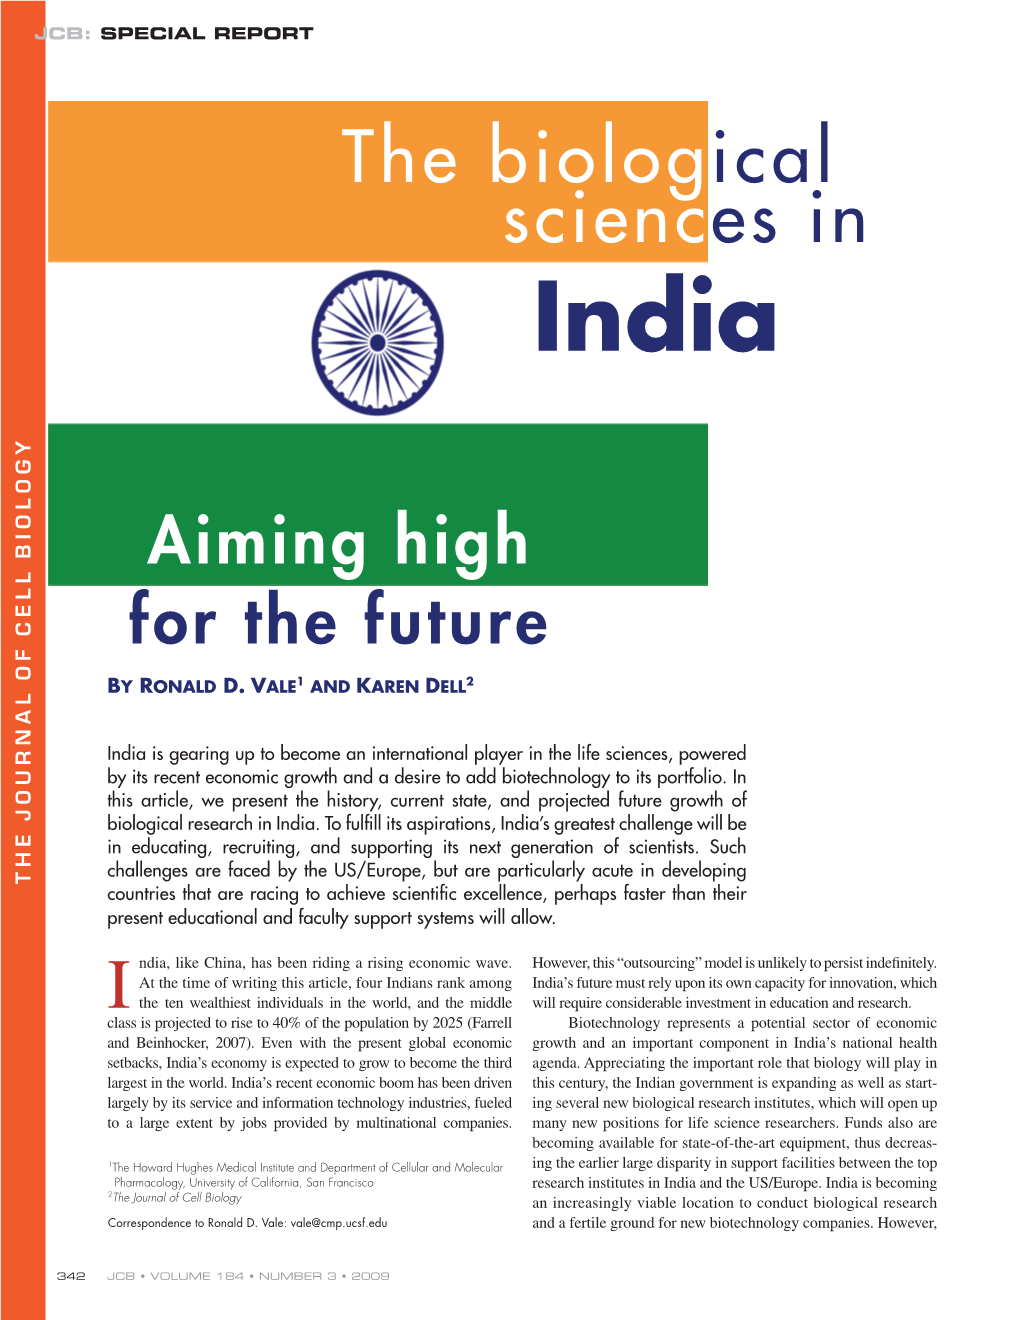 The Biological Sciences in India